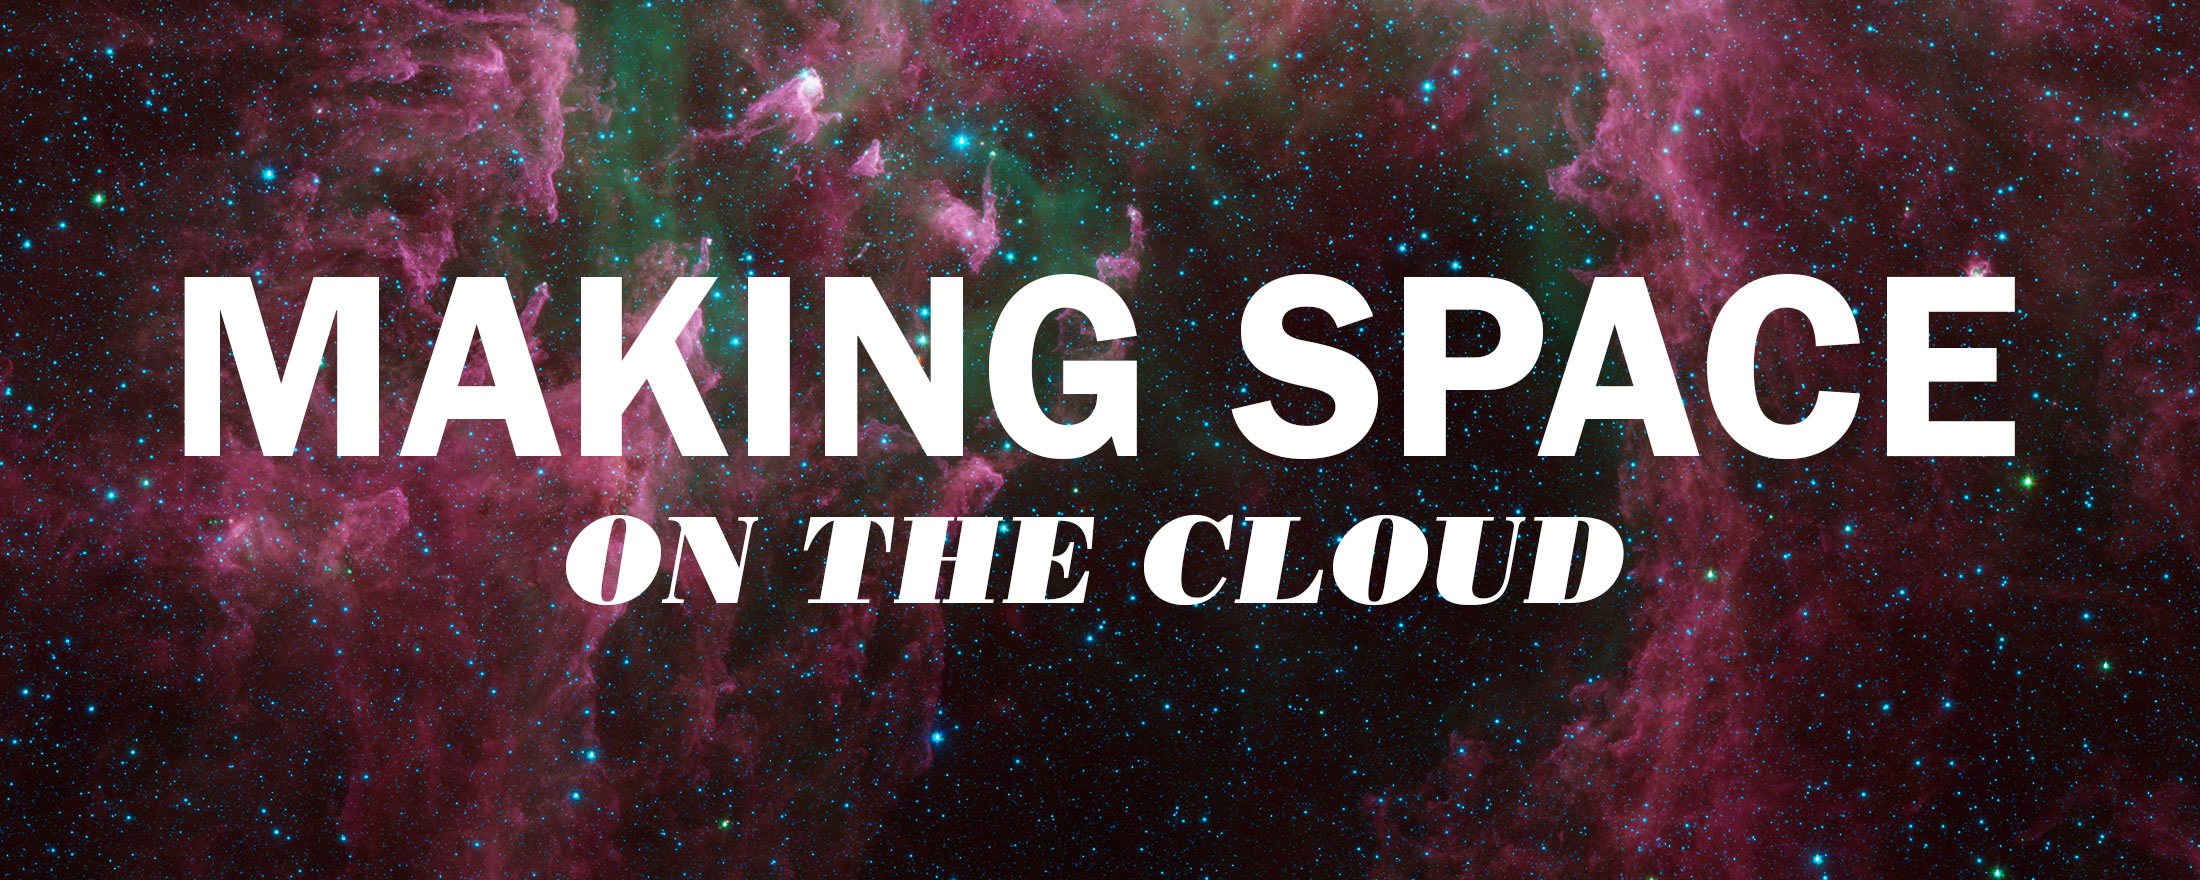 text reads: Making Space on the Cloud